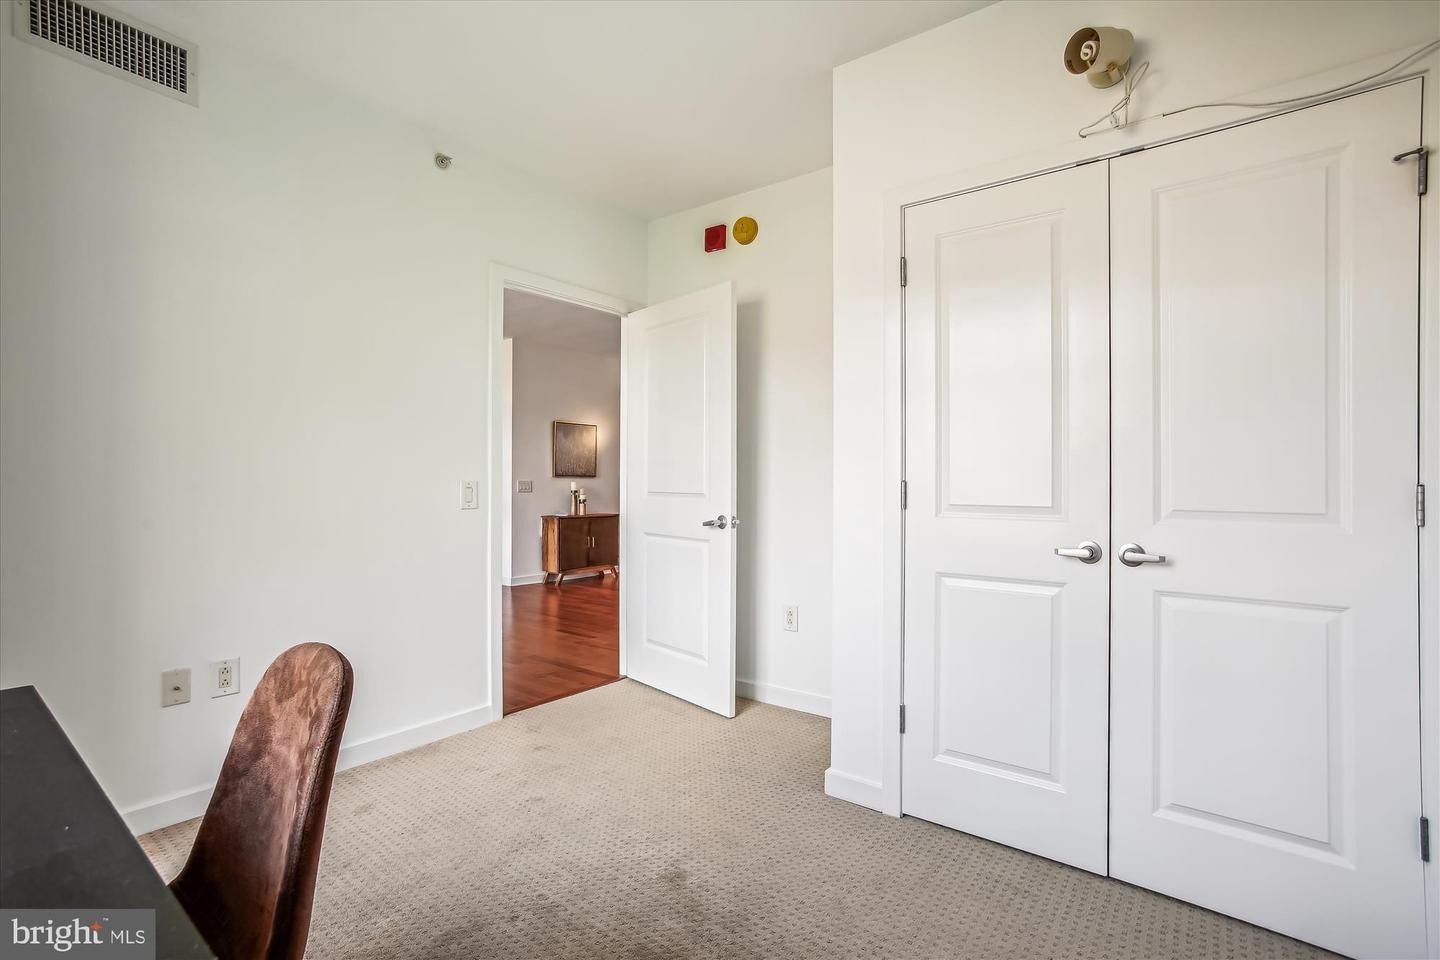 27. 475 K St NW 